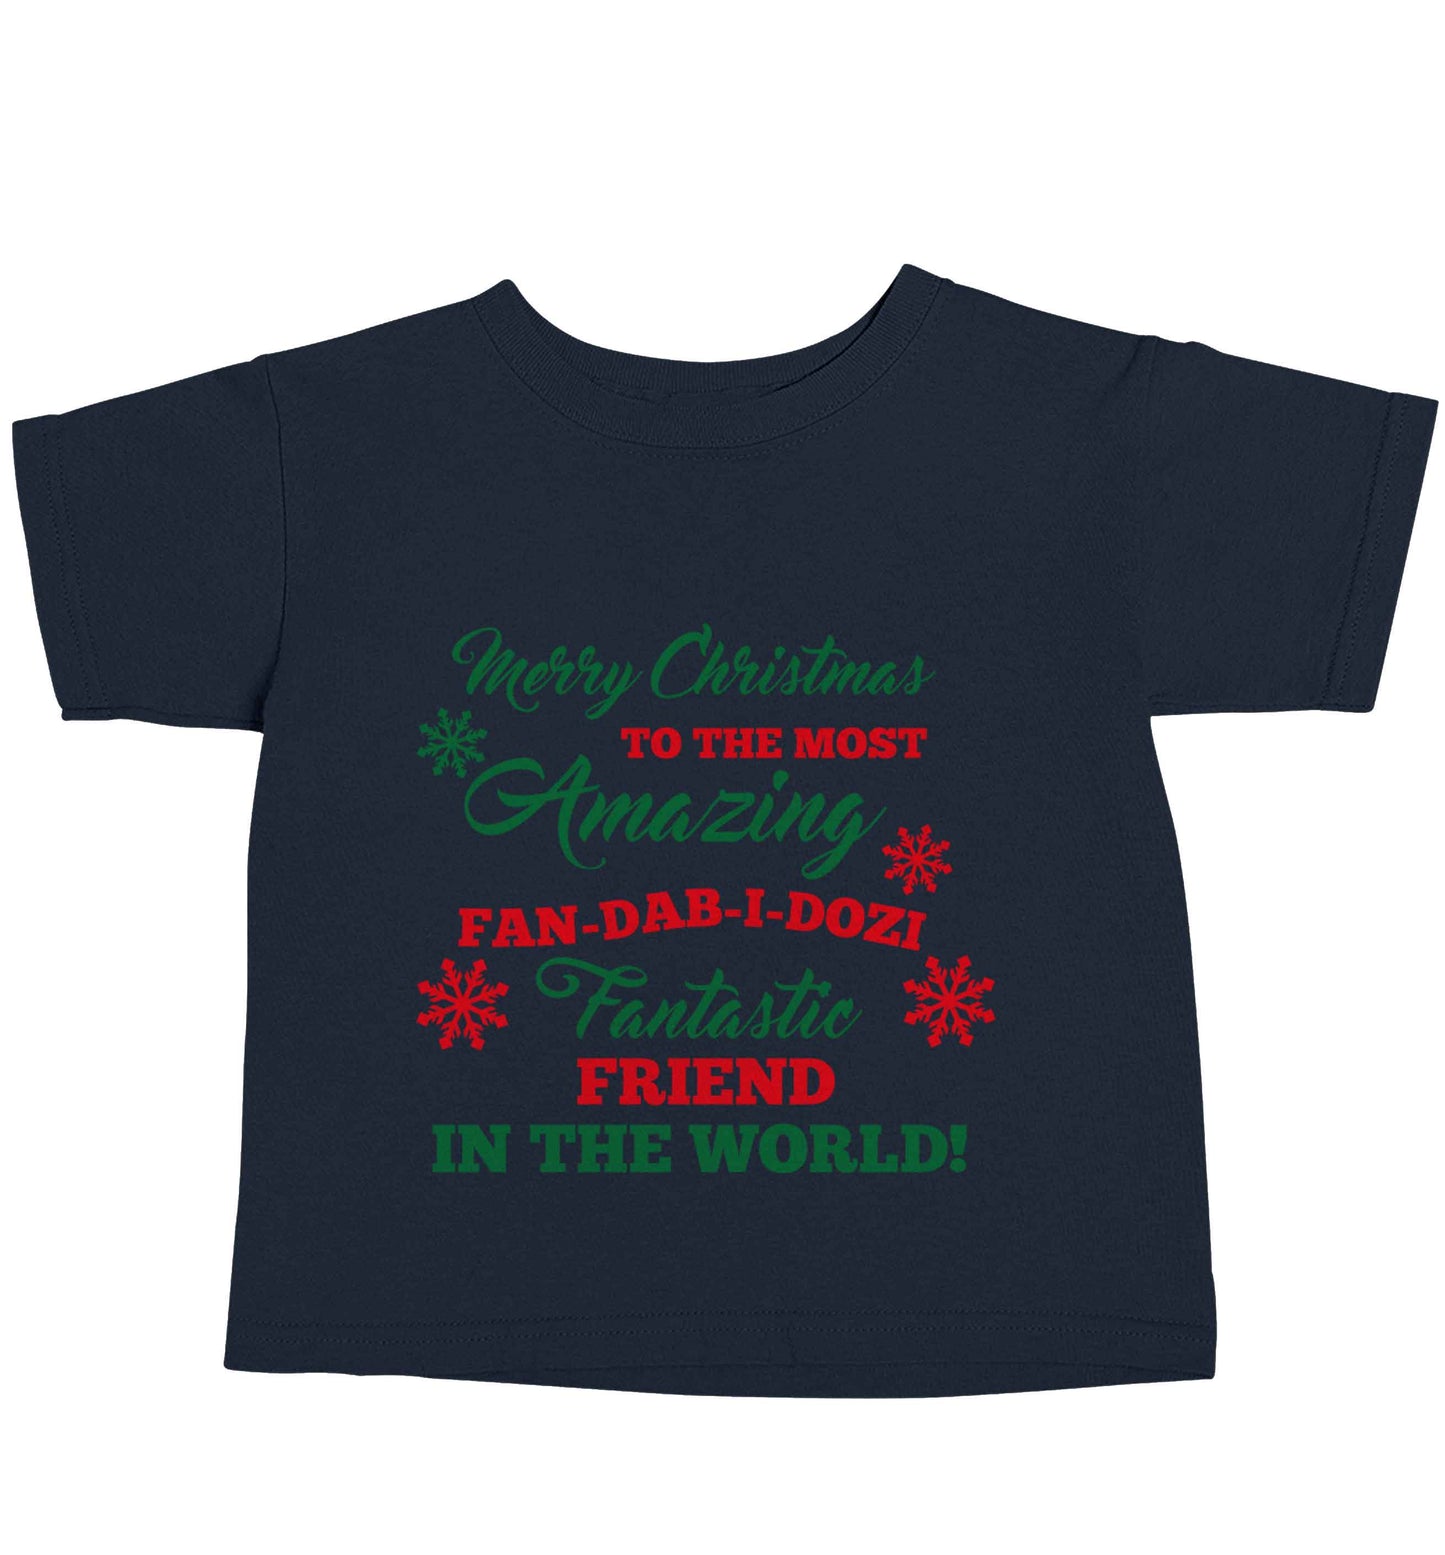 Merry Christmas to the most amazing fan-dab-i-dozi fantasic friend in the world navy baby toddler Tshirt 2 Years